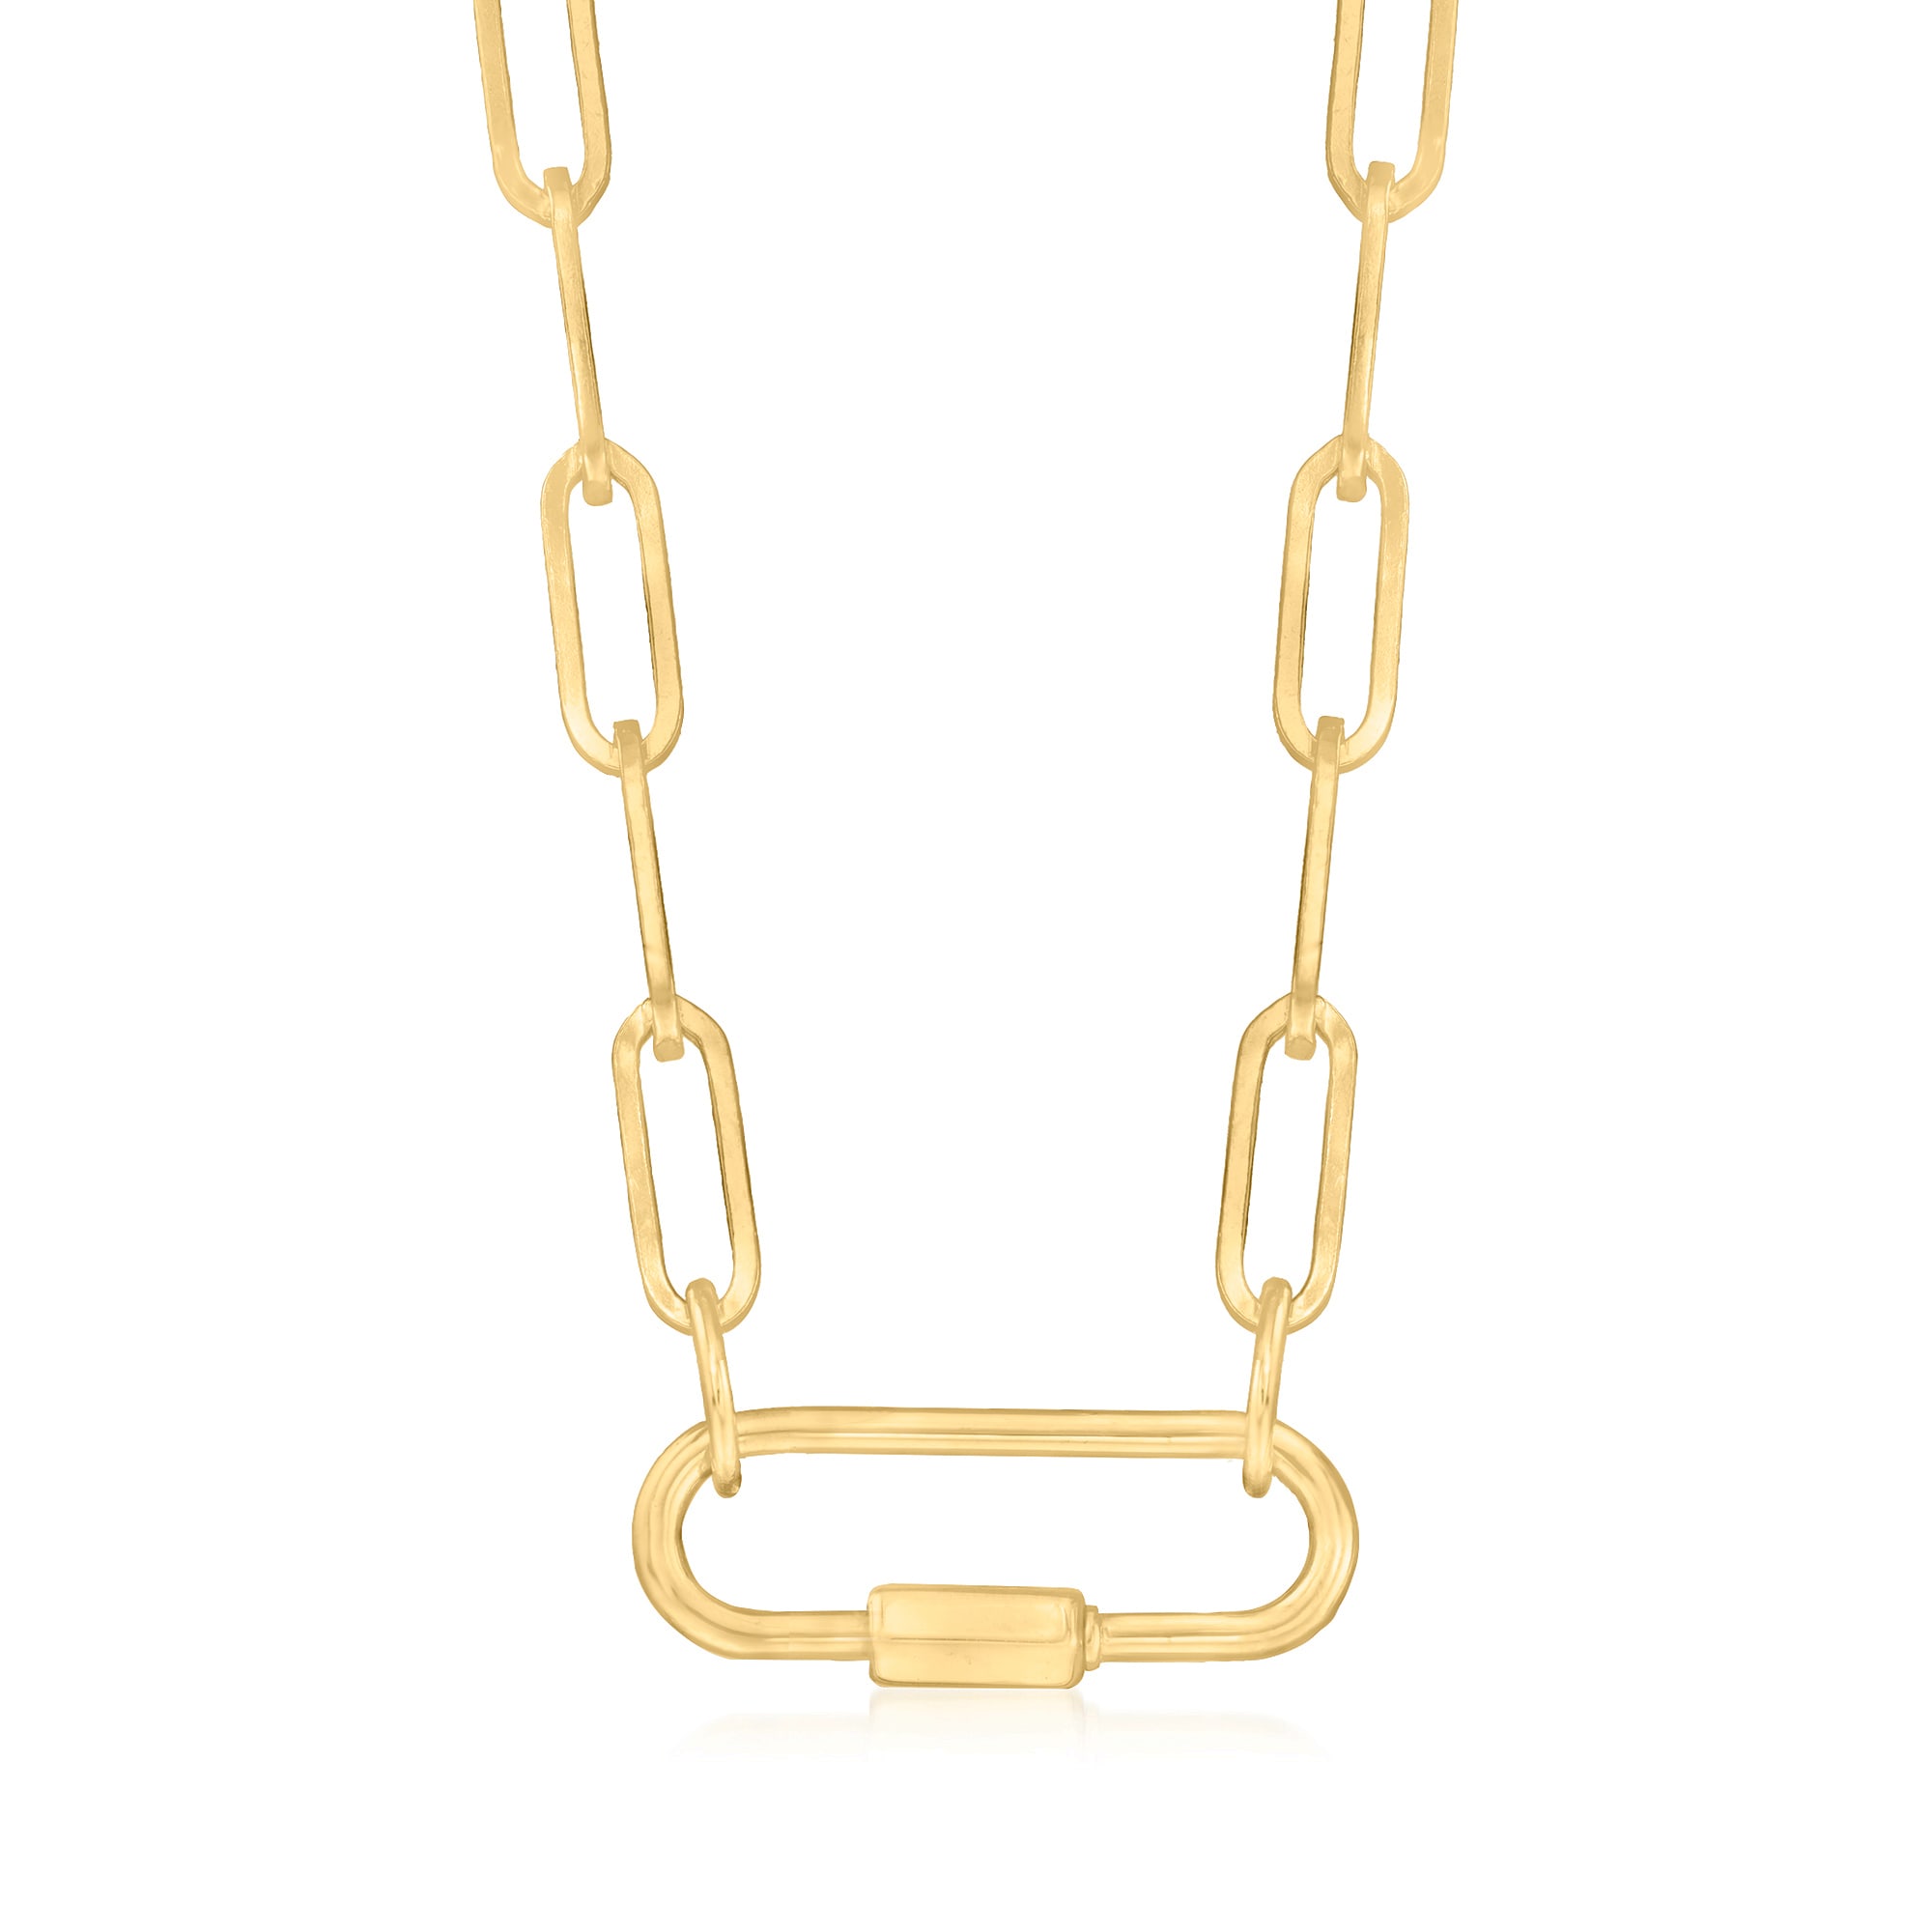 14K Gold Carabiner Necklace, 14K Gold Carabiner Lock, Gold Carabiner Necklace, Elongated Link Carabiner, Paperclip Chain, 9k Paperclip Chain